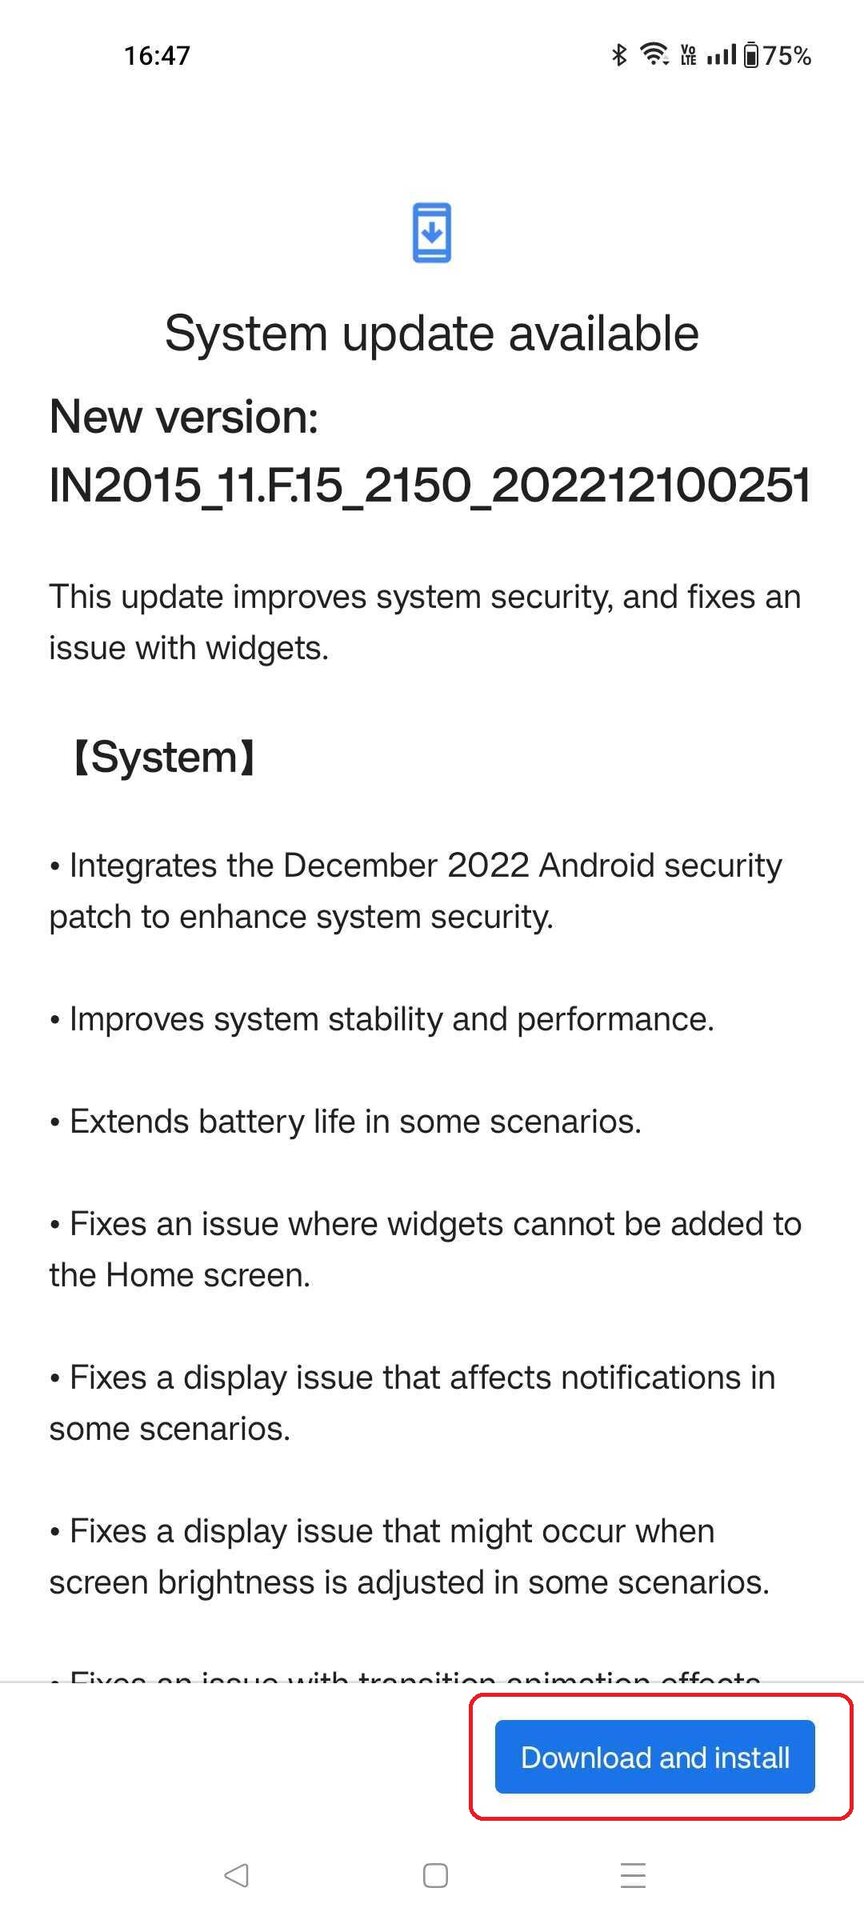 OnePlus 8 system update available